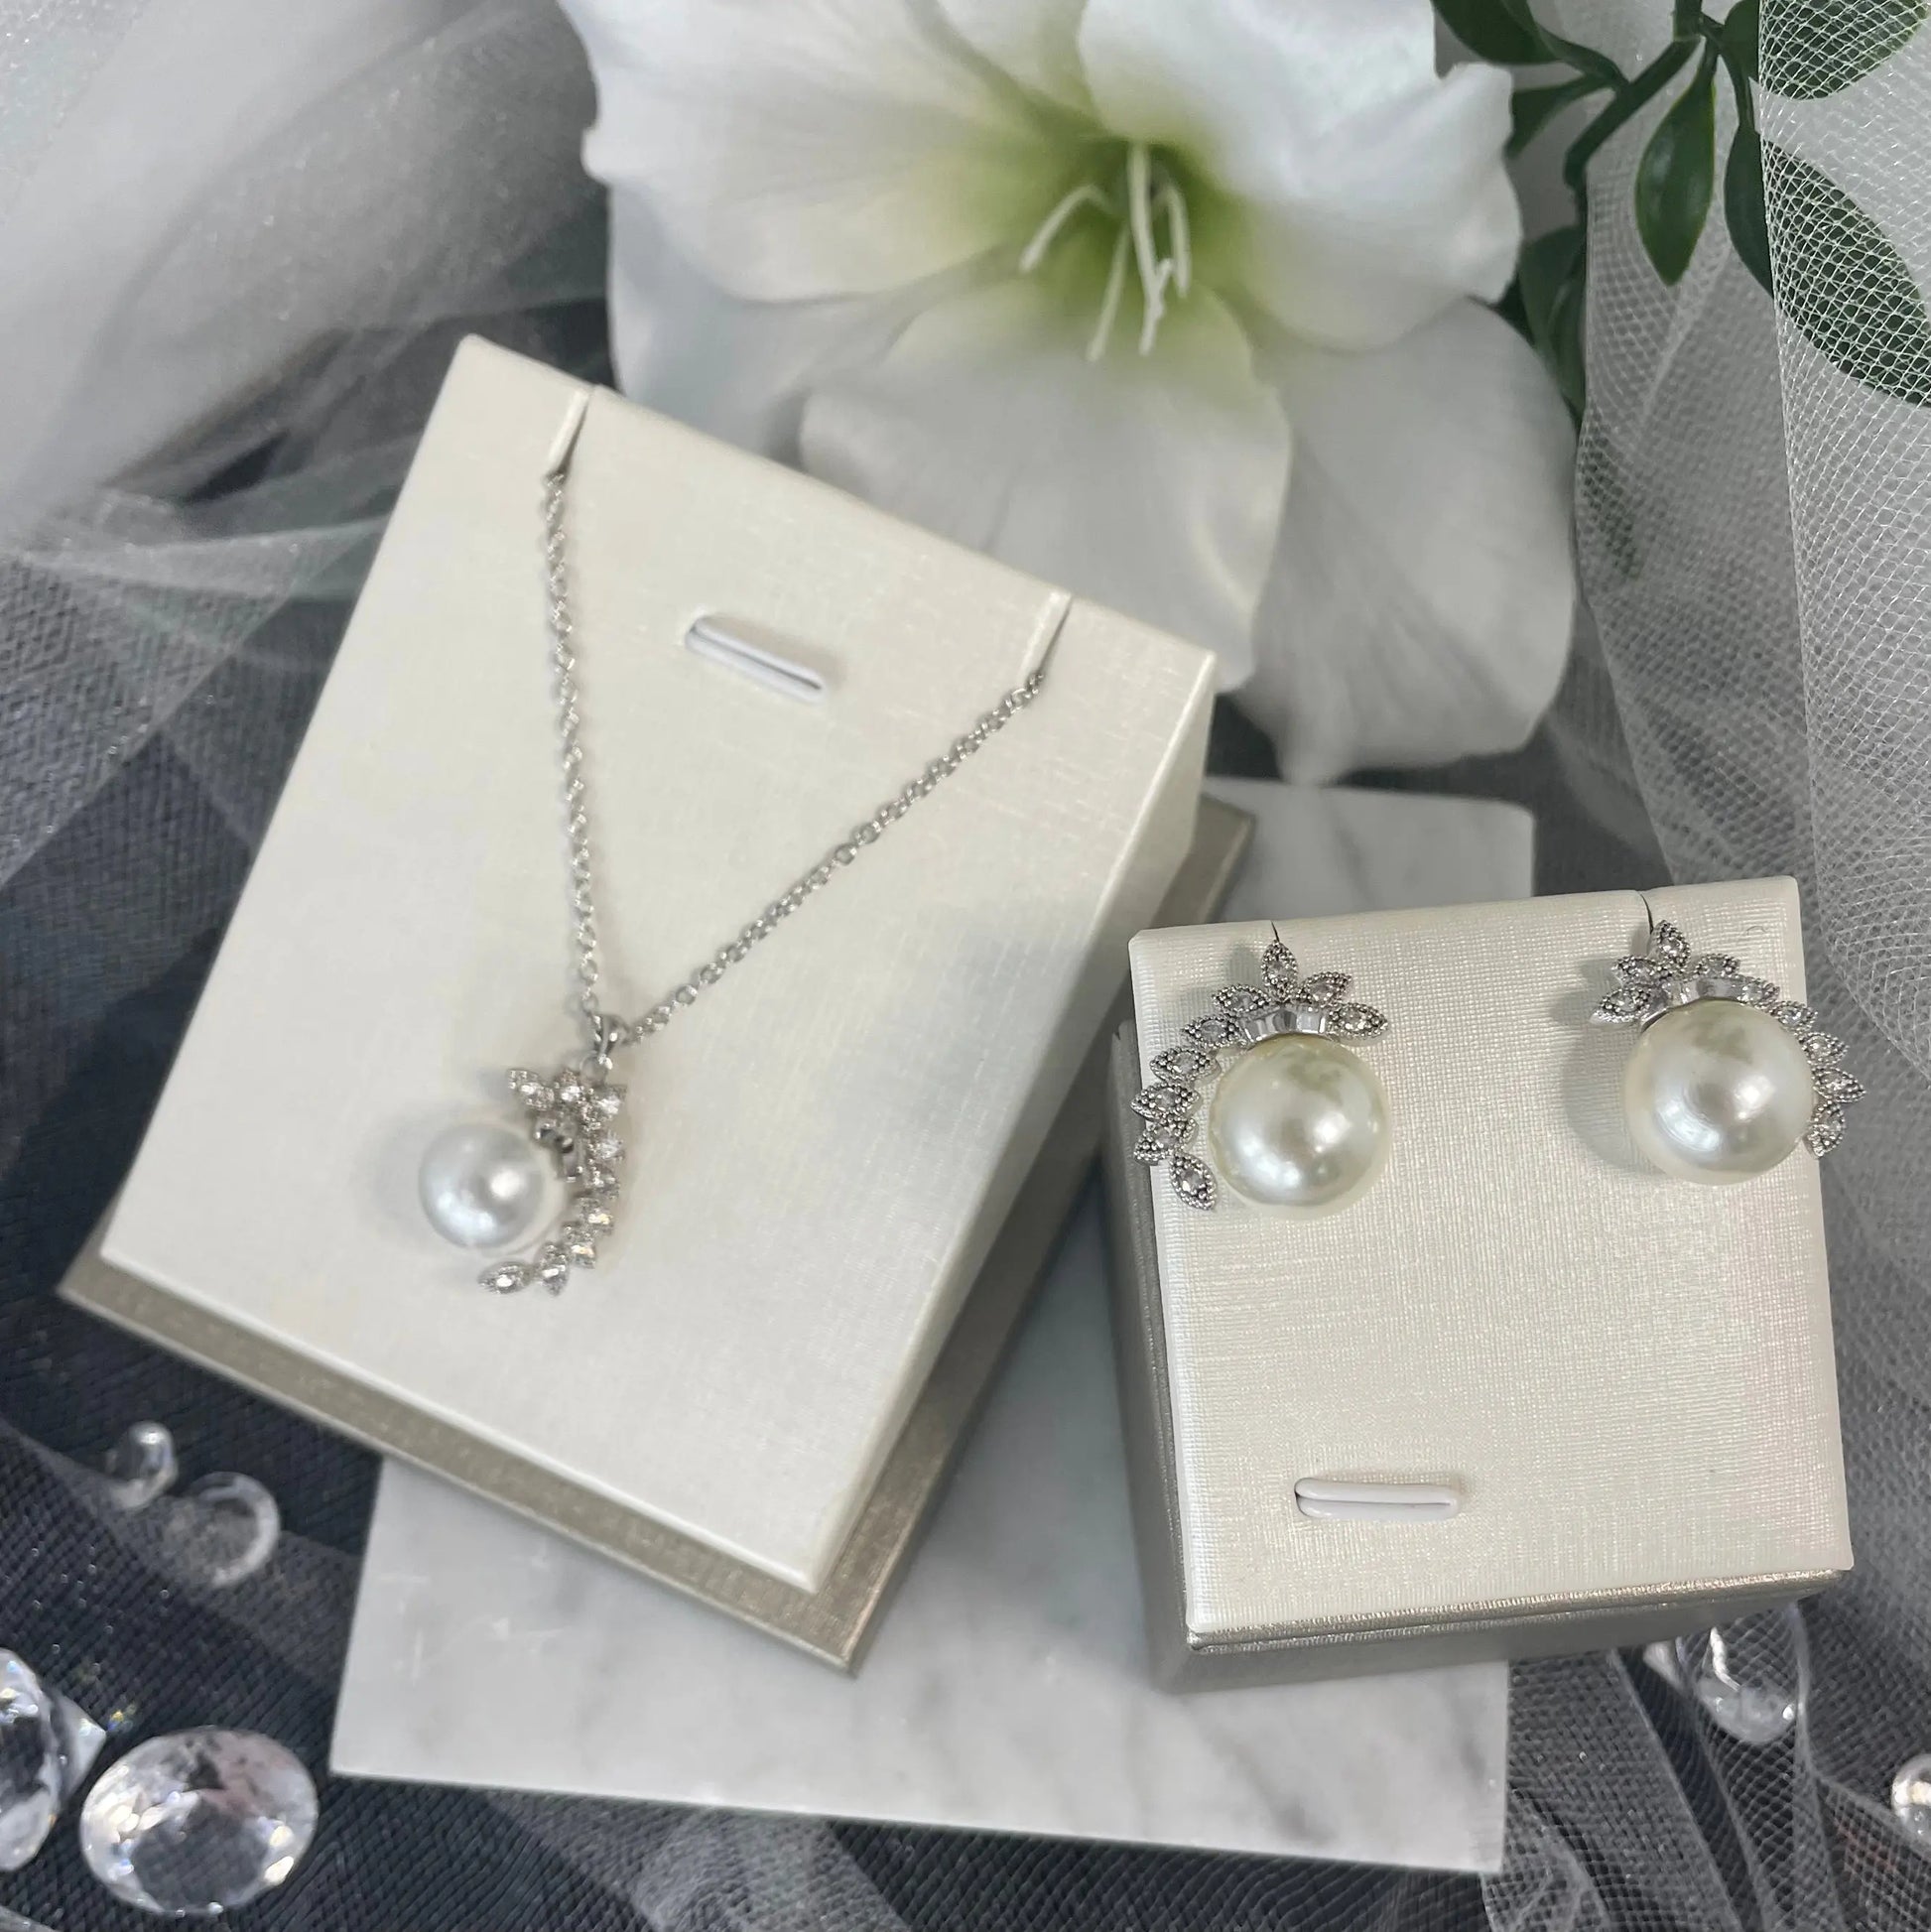 Gloria Necklace & Earring Set: A classic pearl and CZ jewelry set featuring a necklace and earrings with a center pearl and scattered CZ leaves, perfect for special occasions.